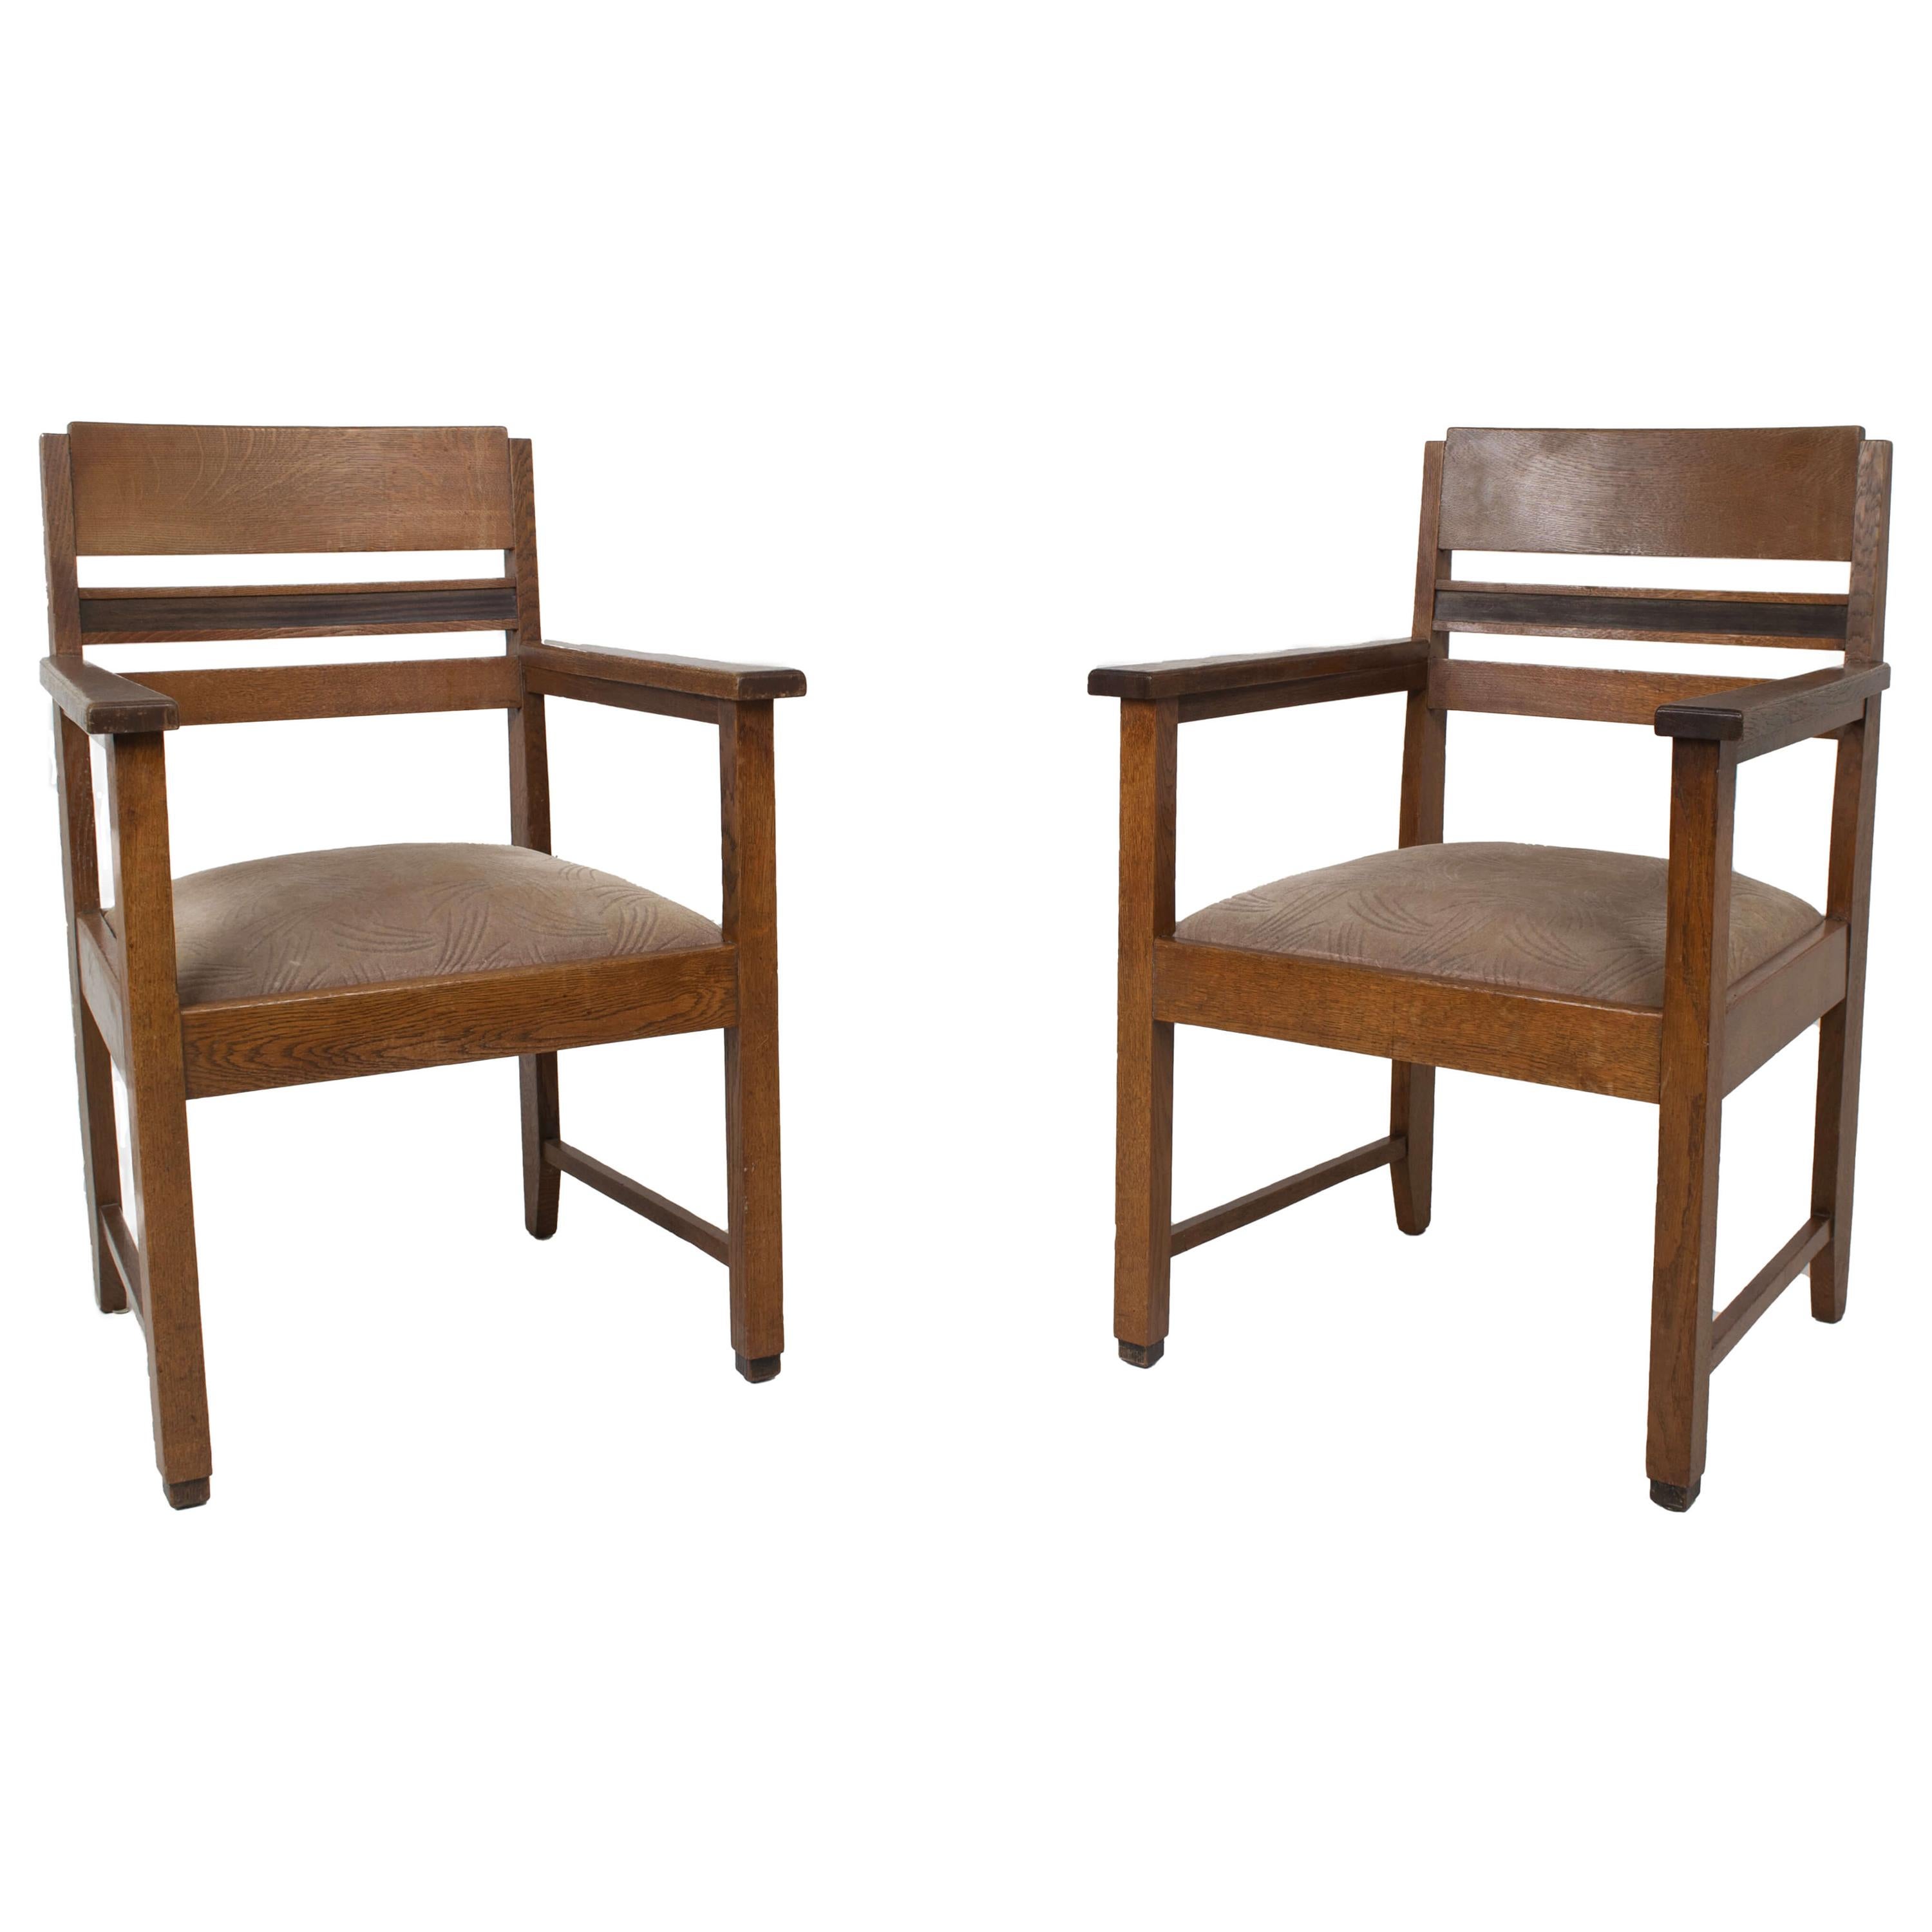 Set of Amsterdam School Arm Chairs, the Netherlands, 1930s